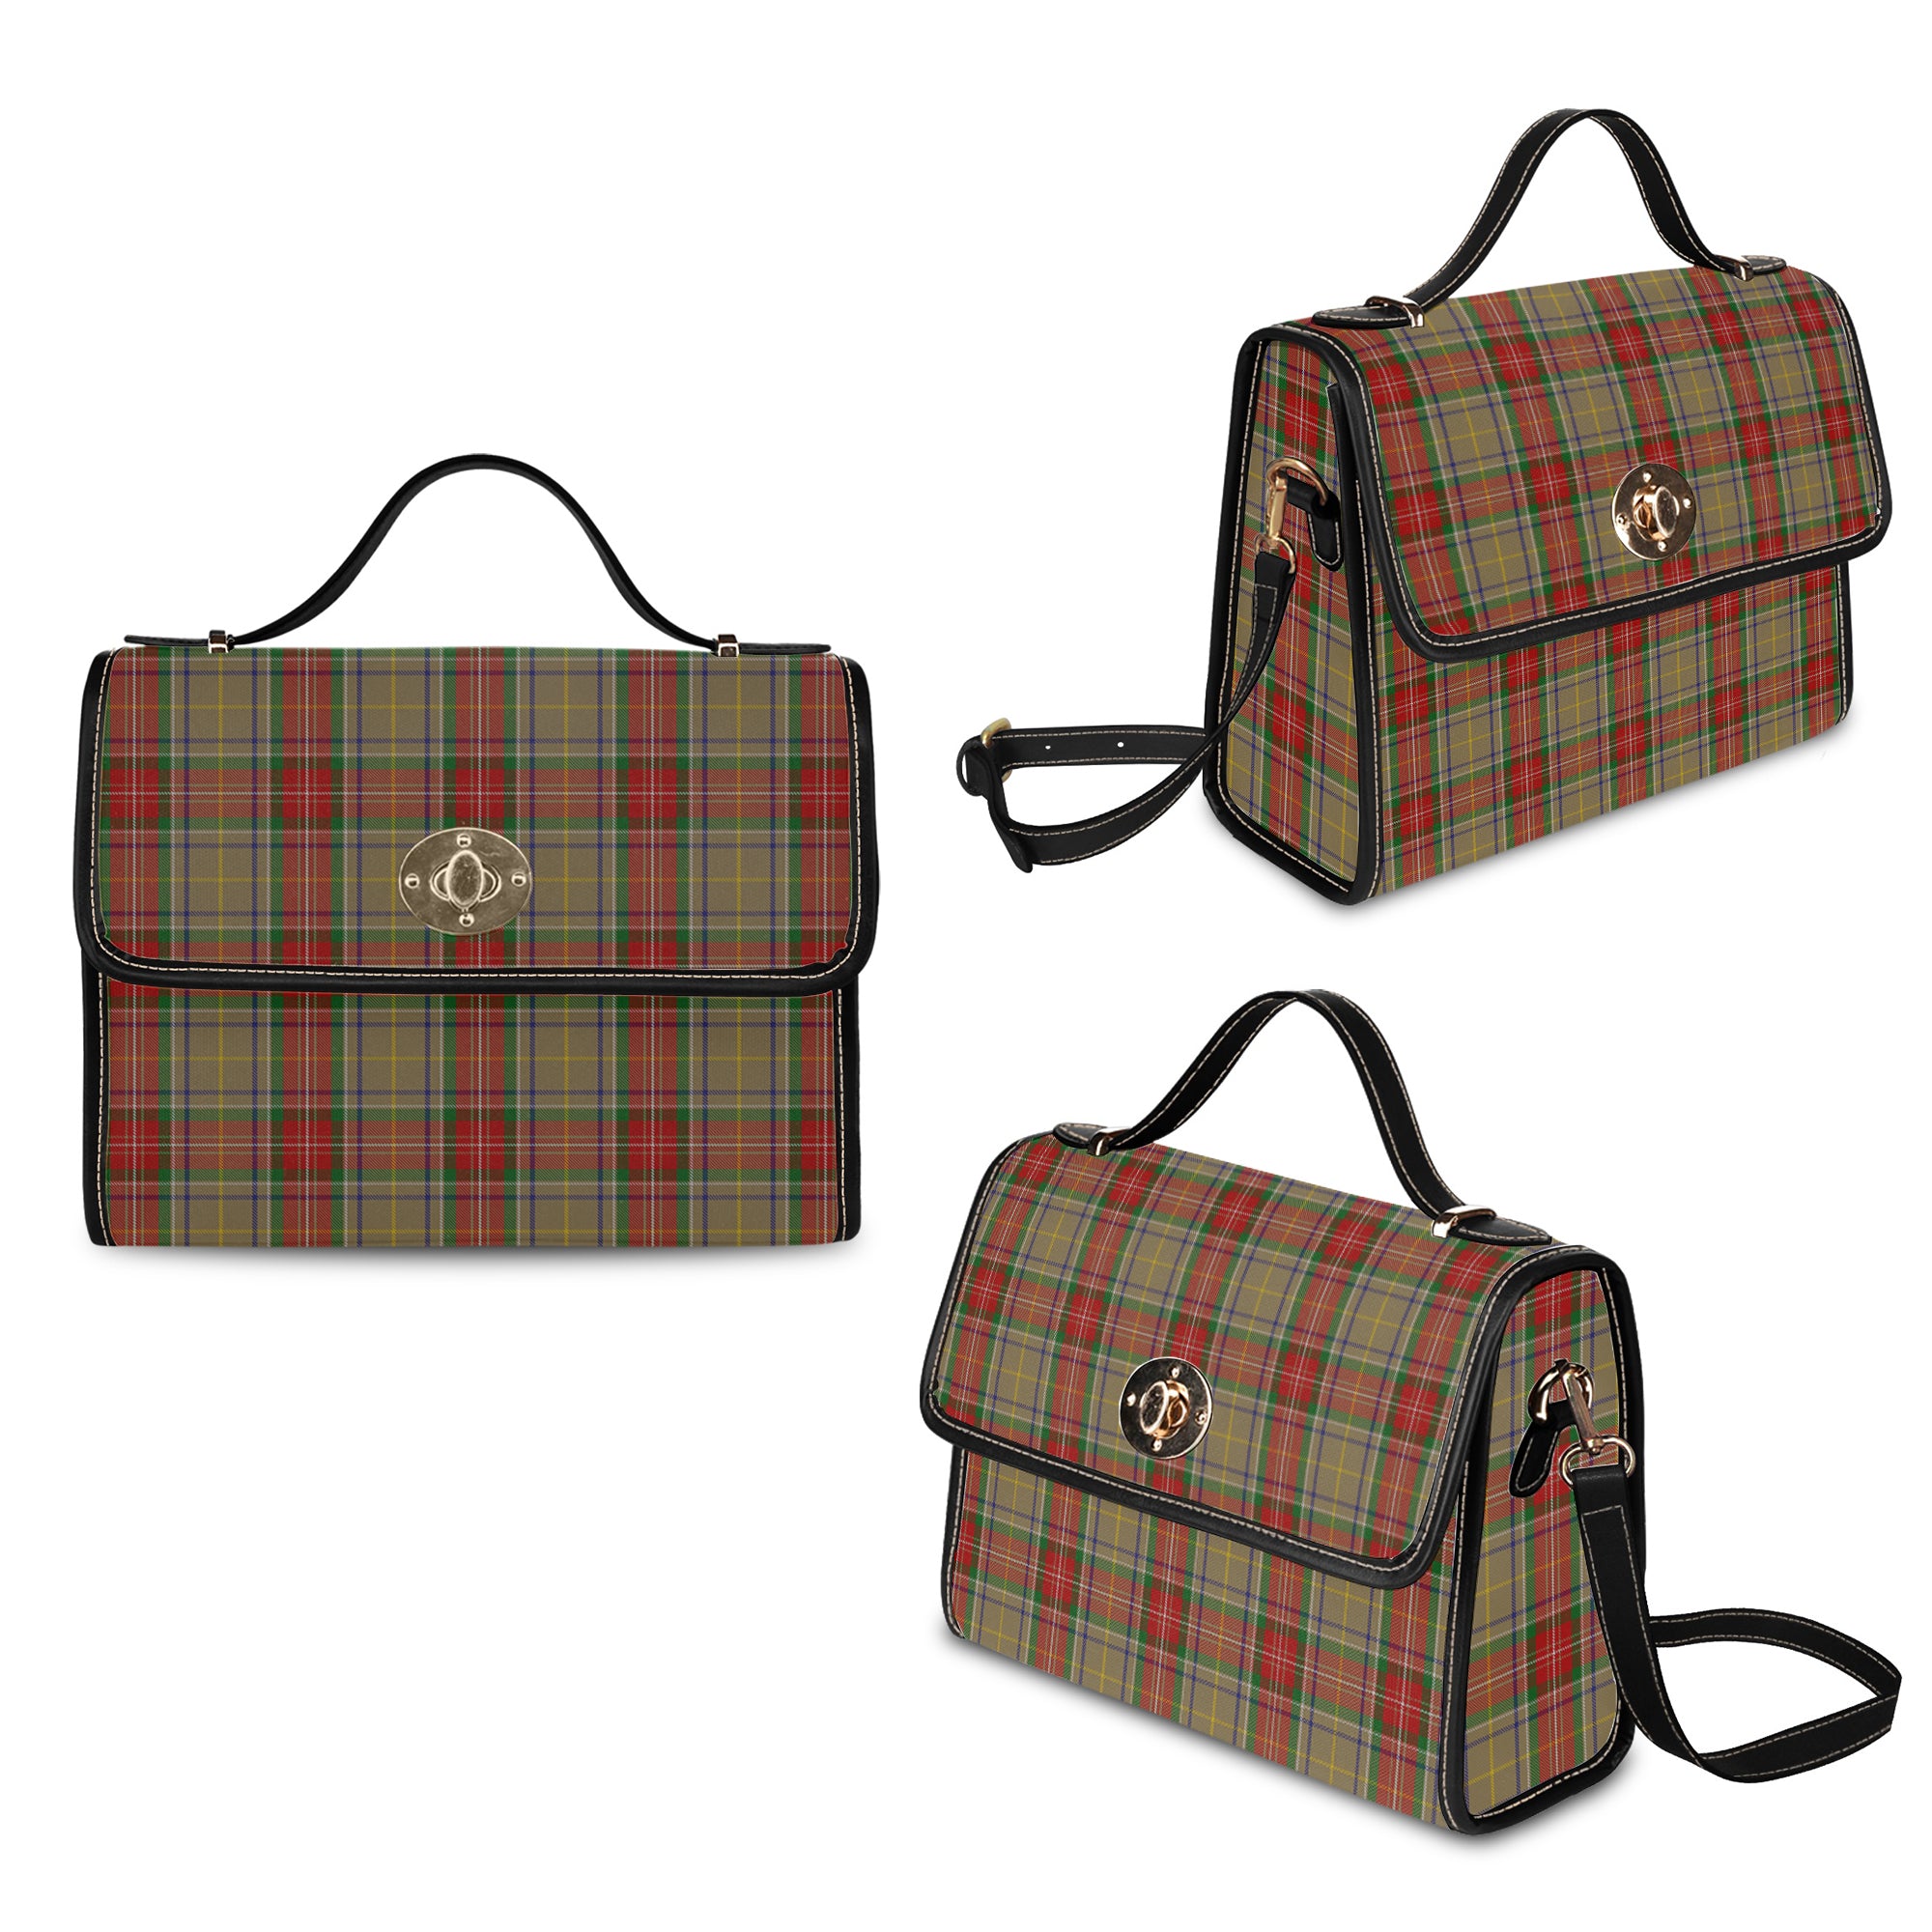 muirhead-old-tartan-canvas-bag-with-leather-shoulder-strap